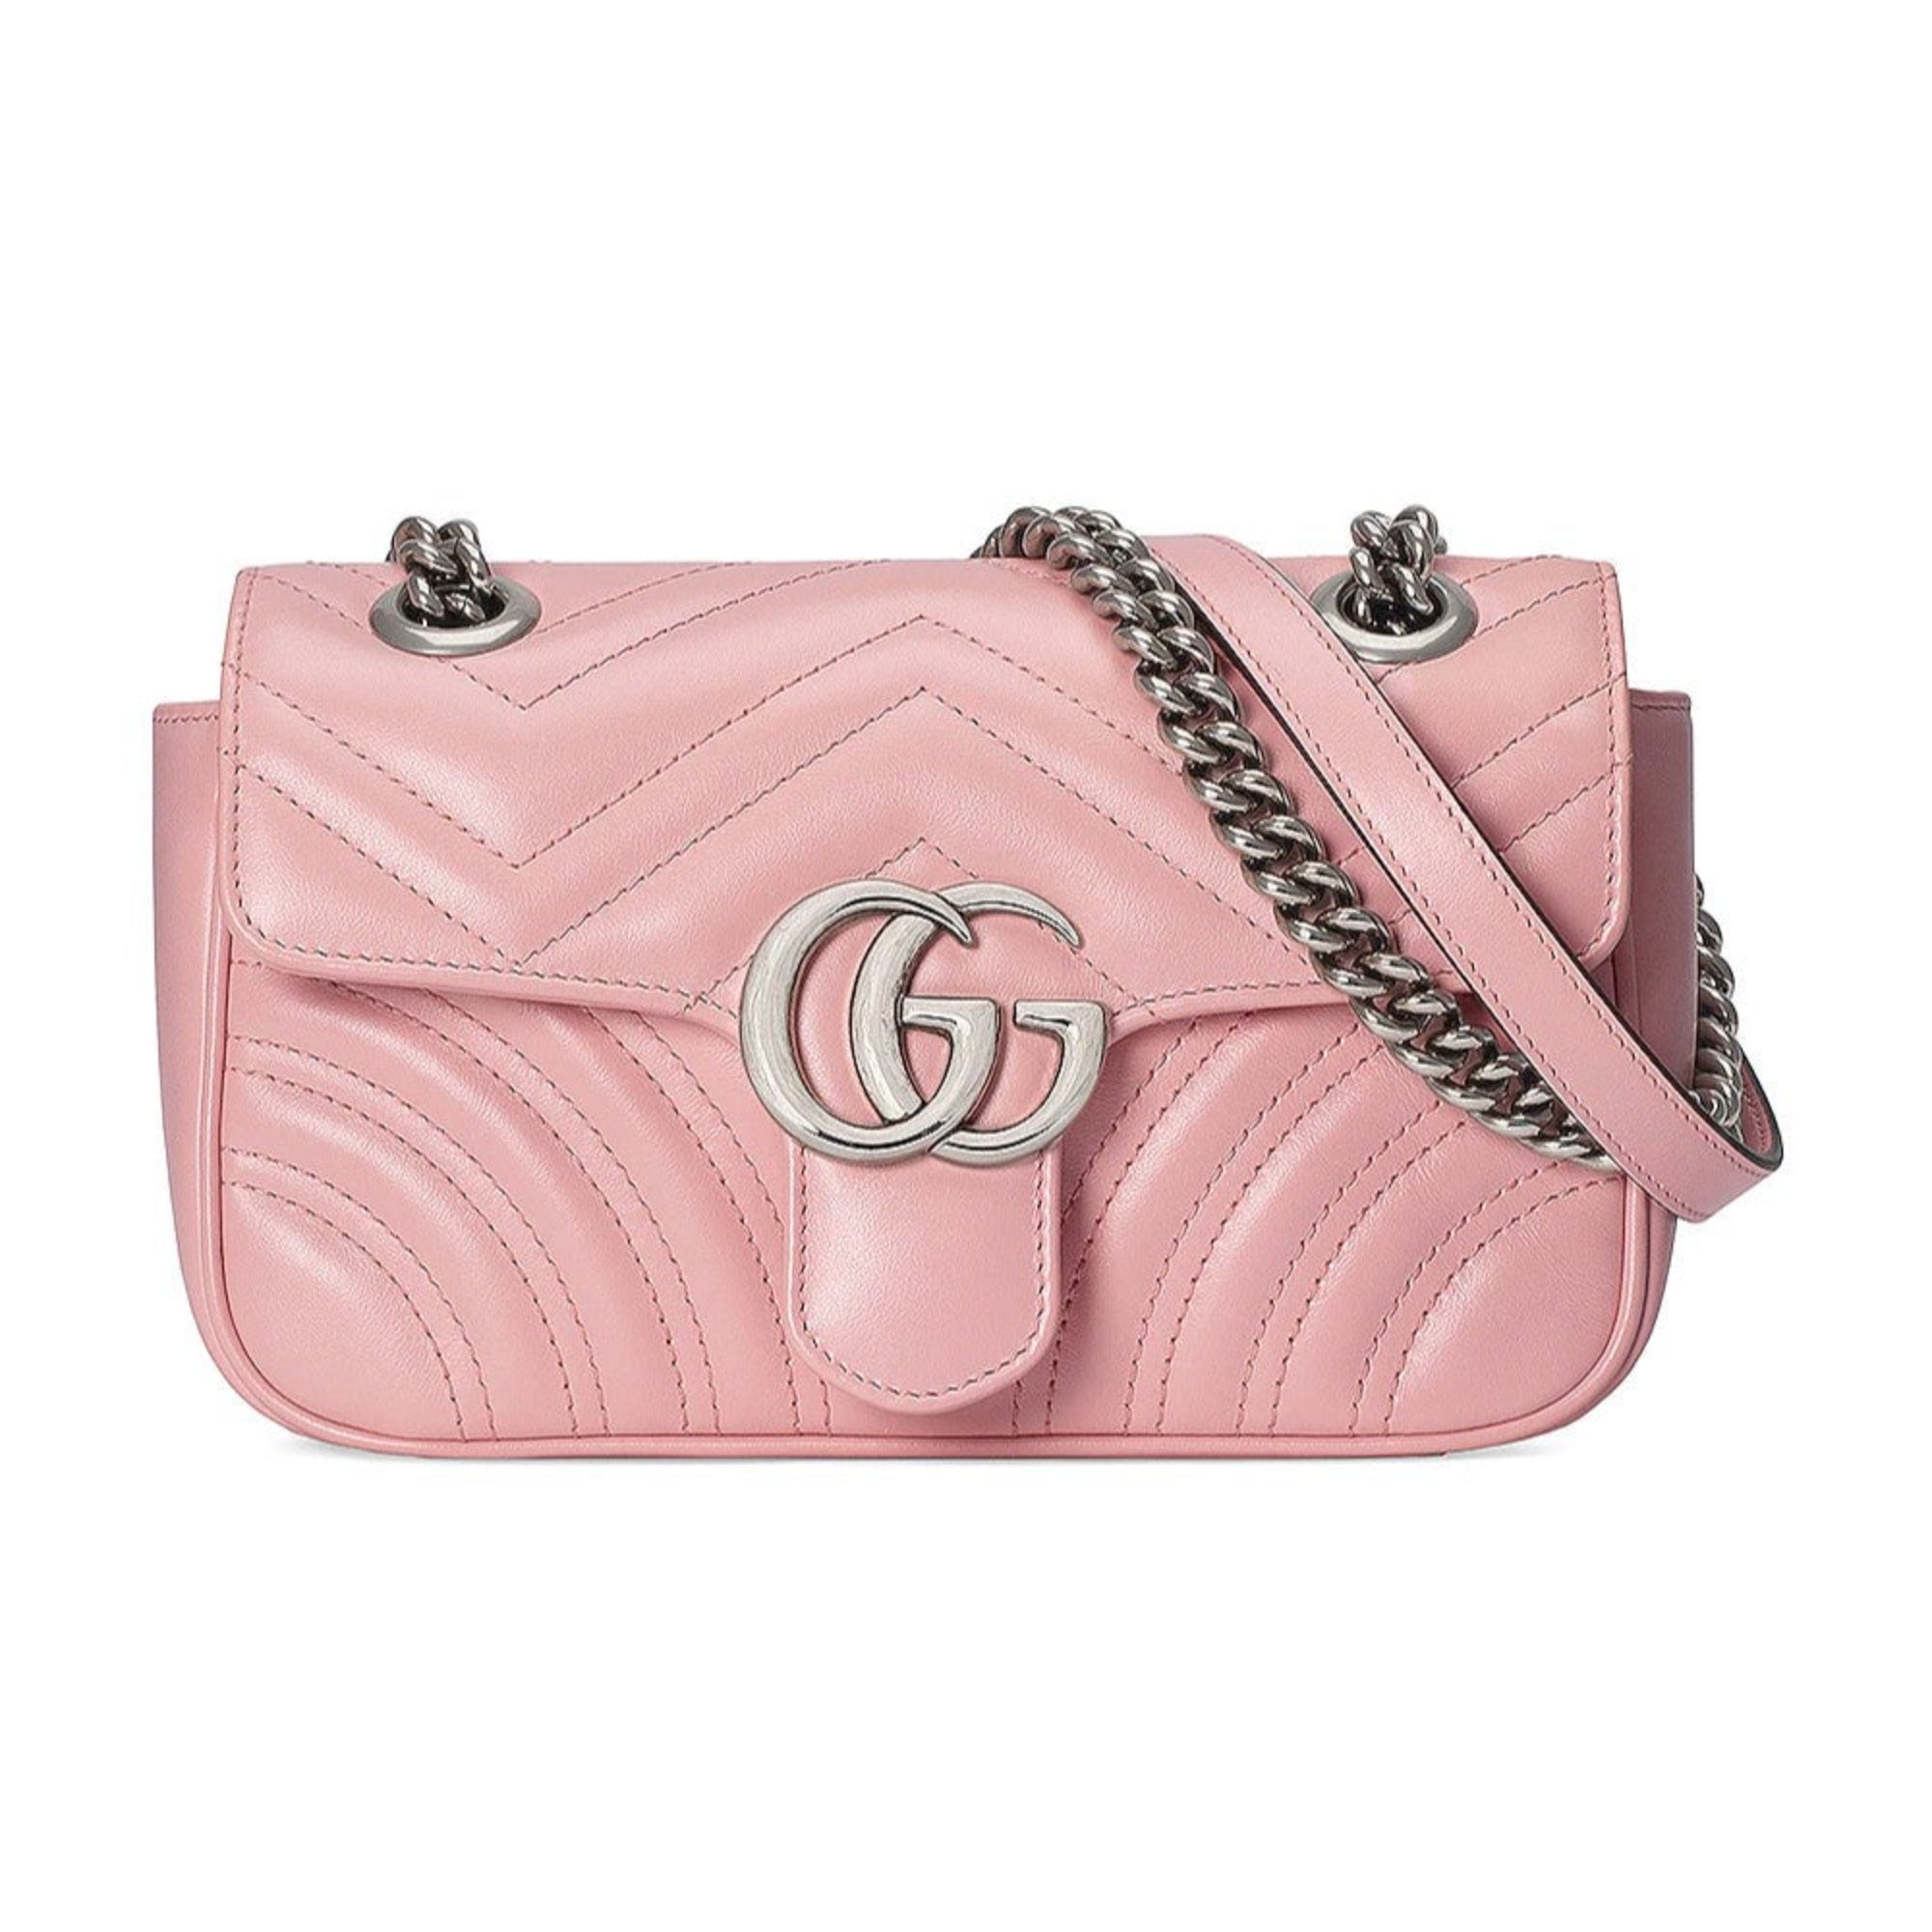 Gucci Marmont Wild Rose Leather Matelasse Mini Shoulder Bag 446744 at_Queen_Bee_of_Beverly_Hills